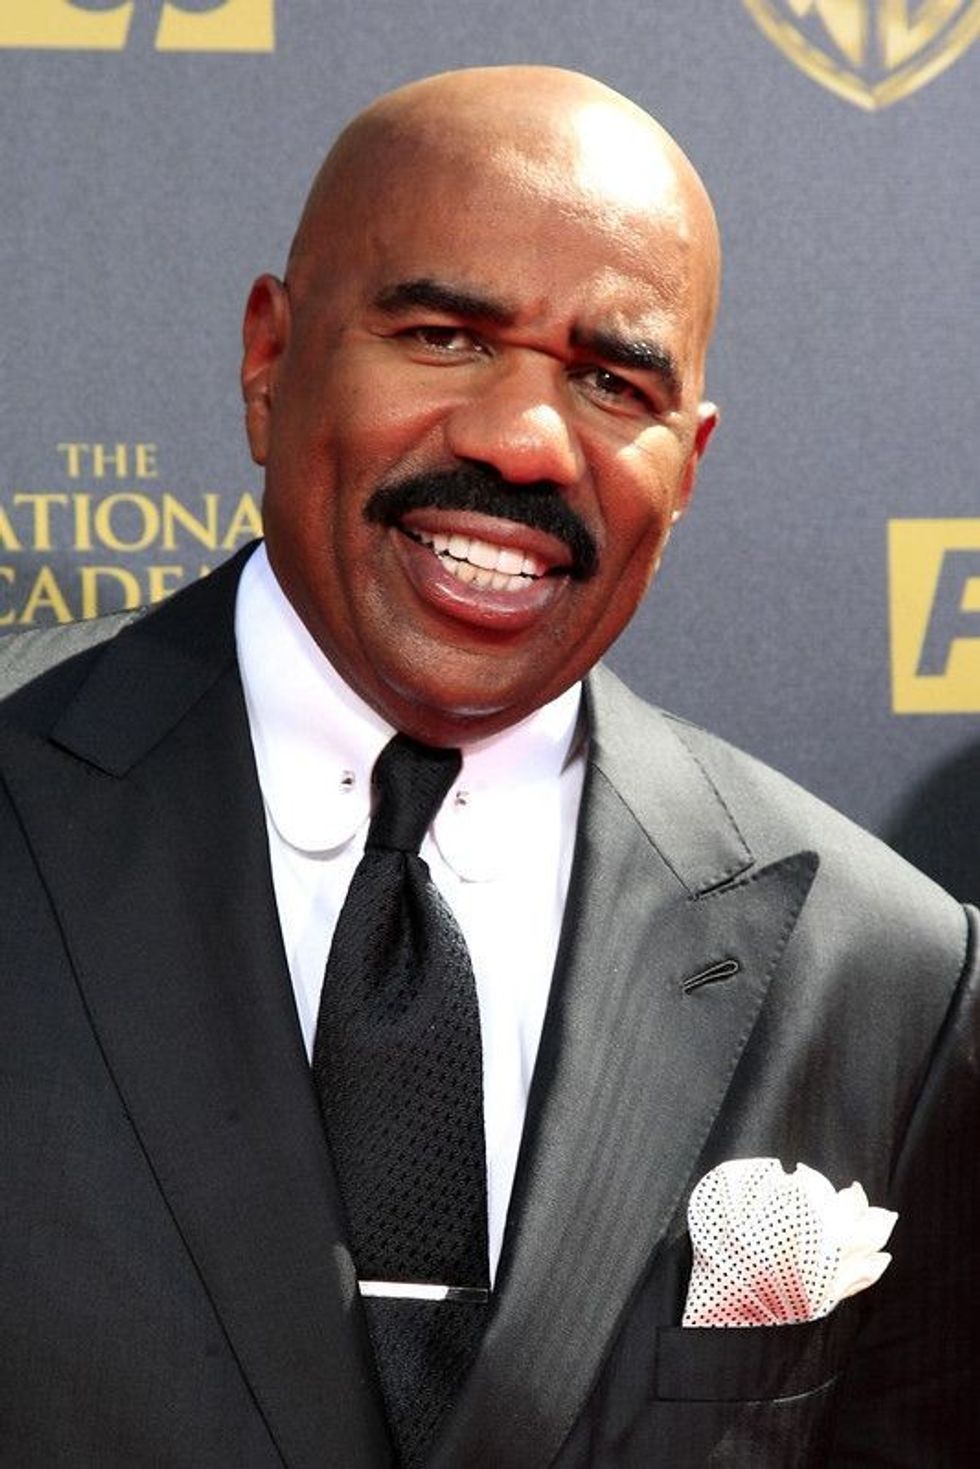 Charismatic Steve Harvey during an event